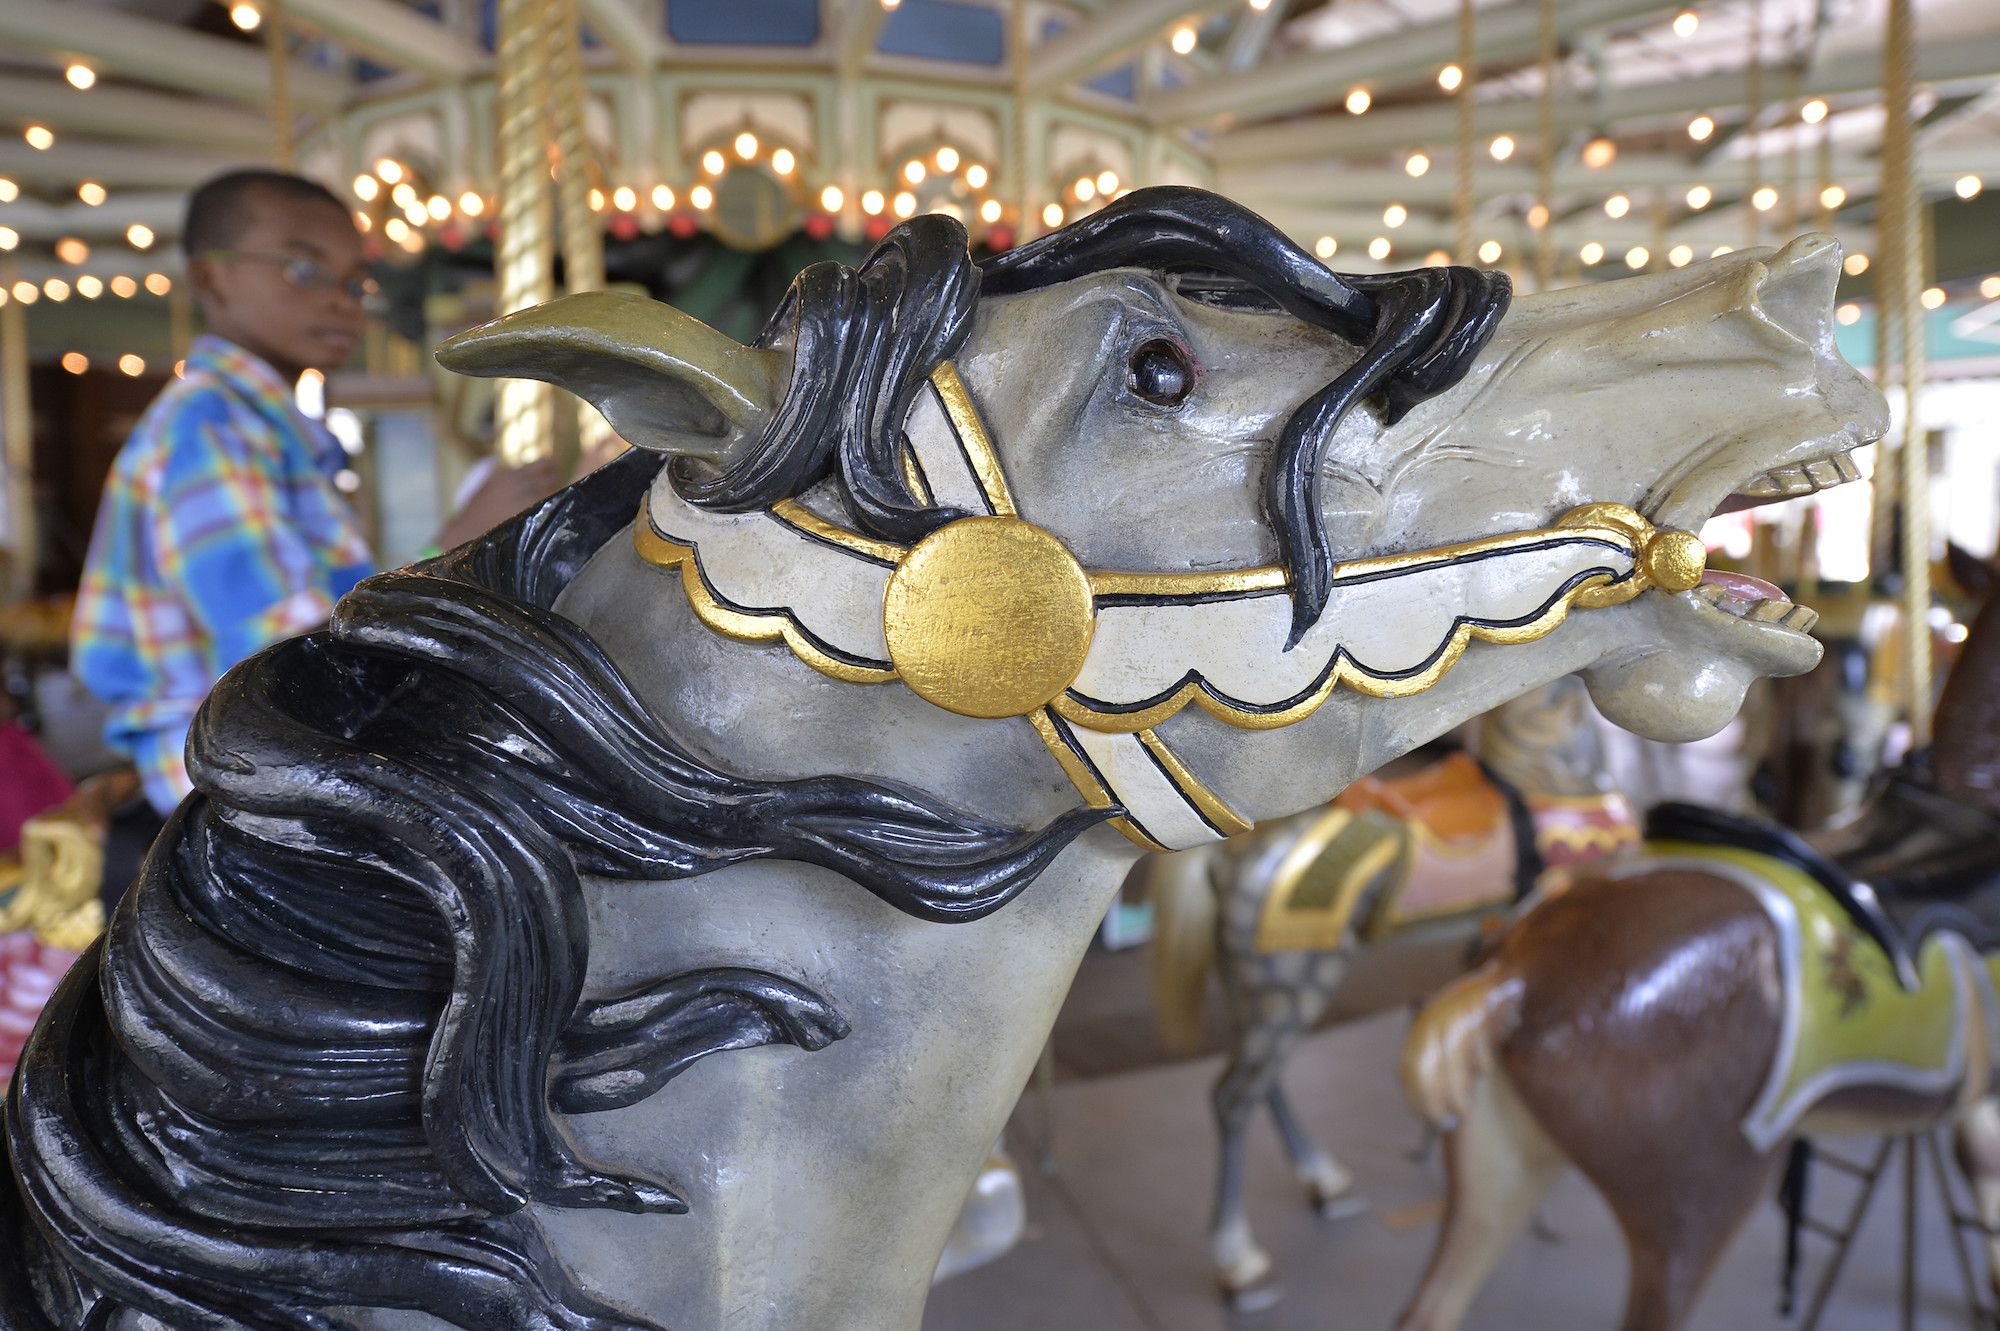 Take A Ride On The Carousel In Prospect Park (Sponsored)